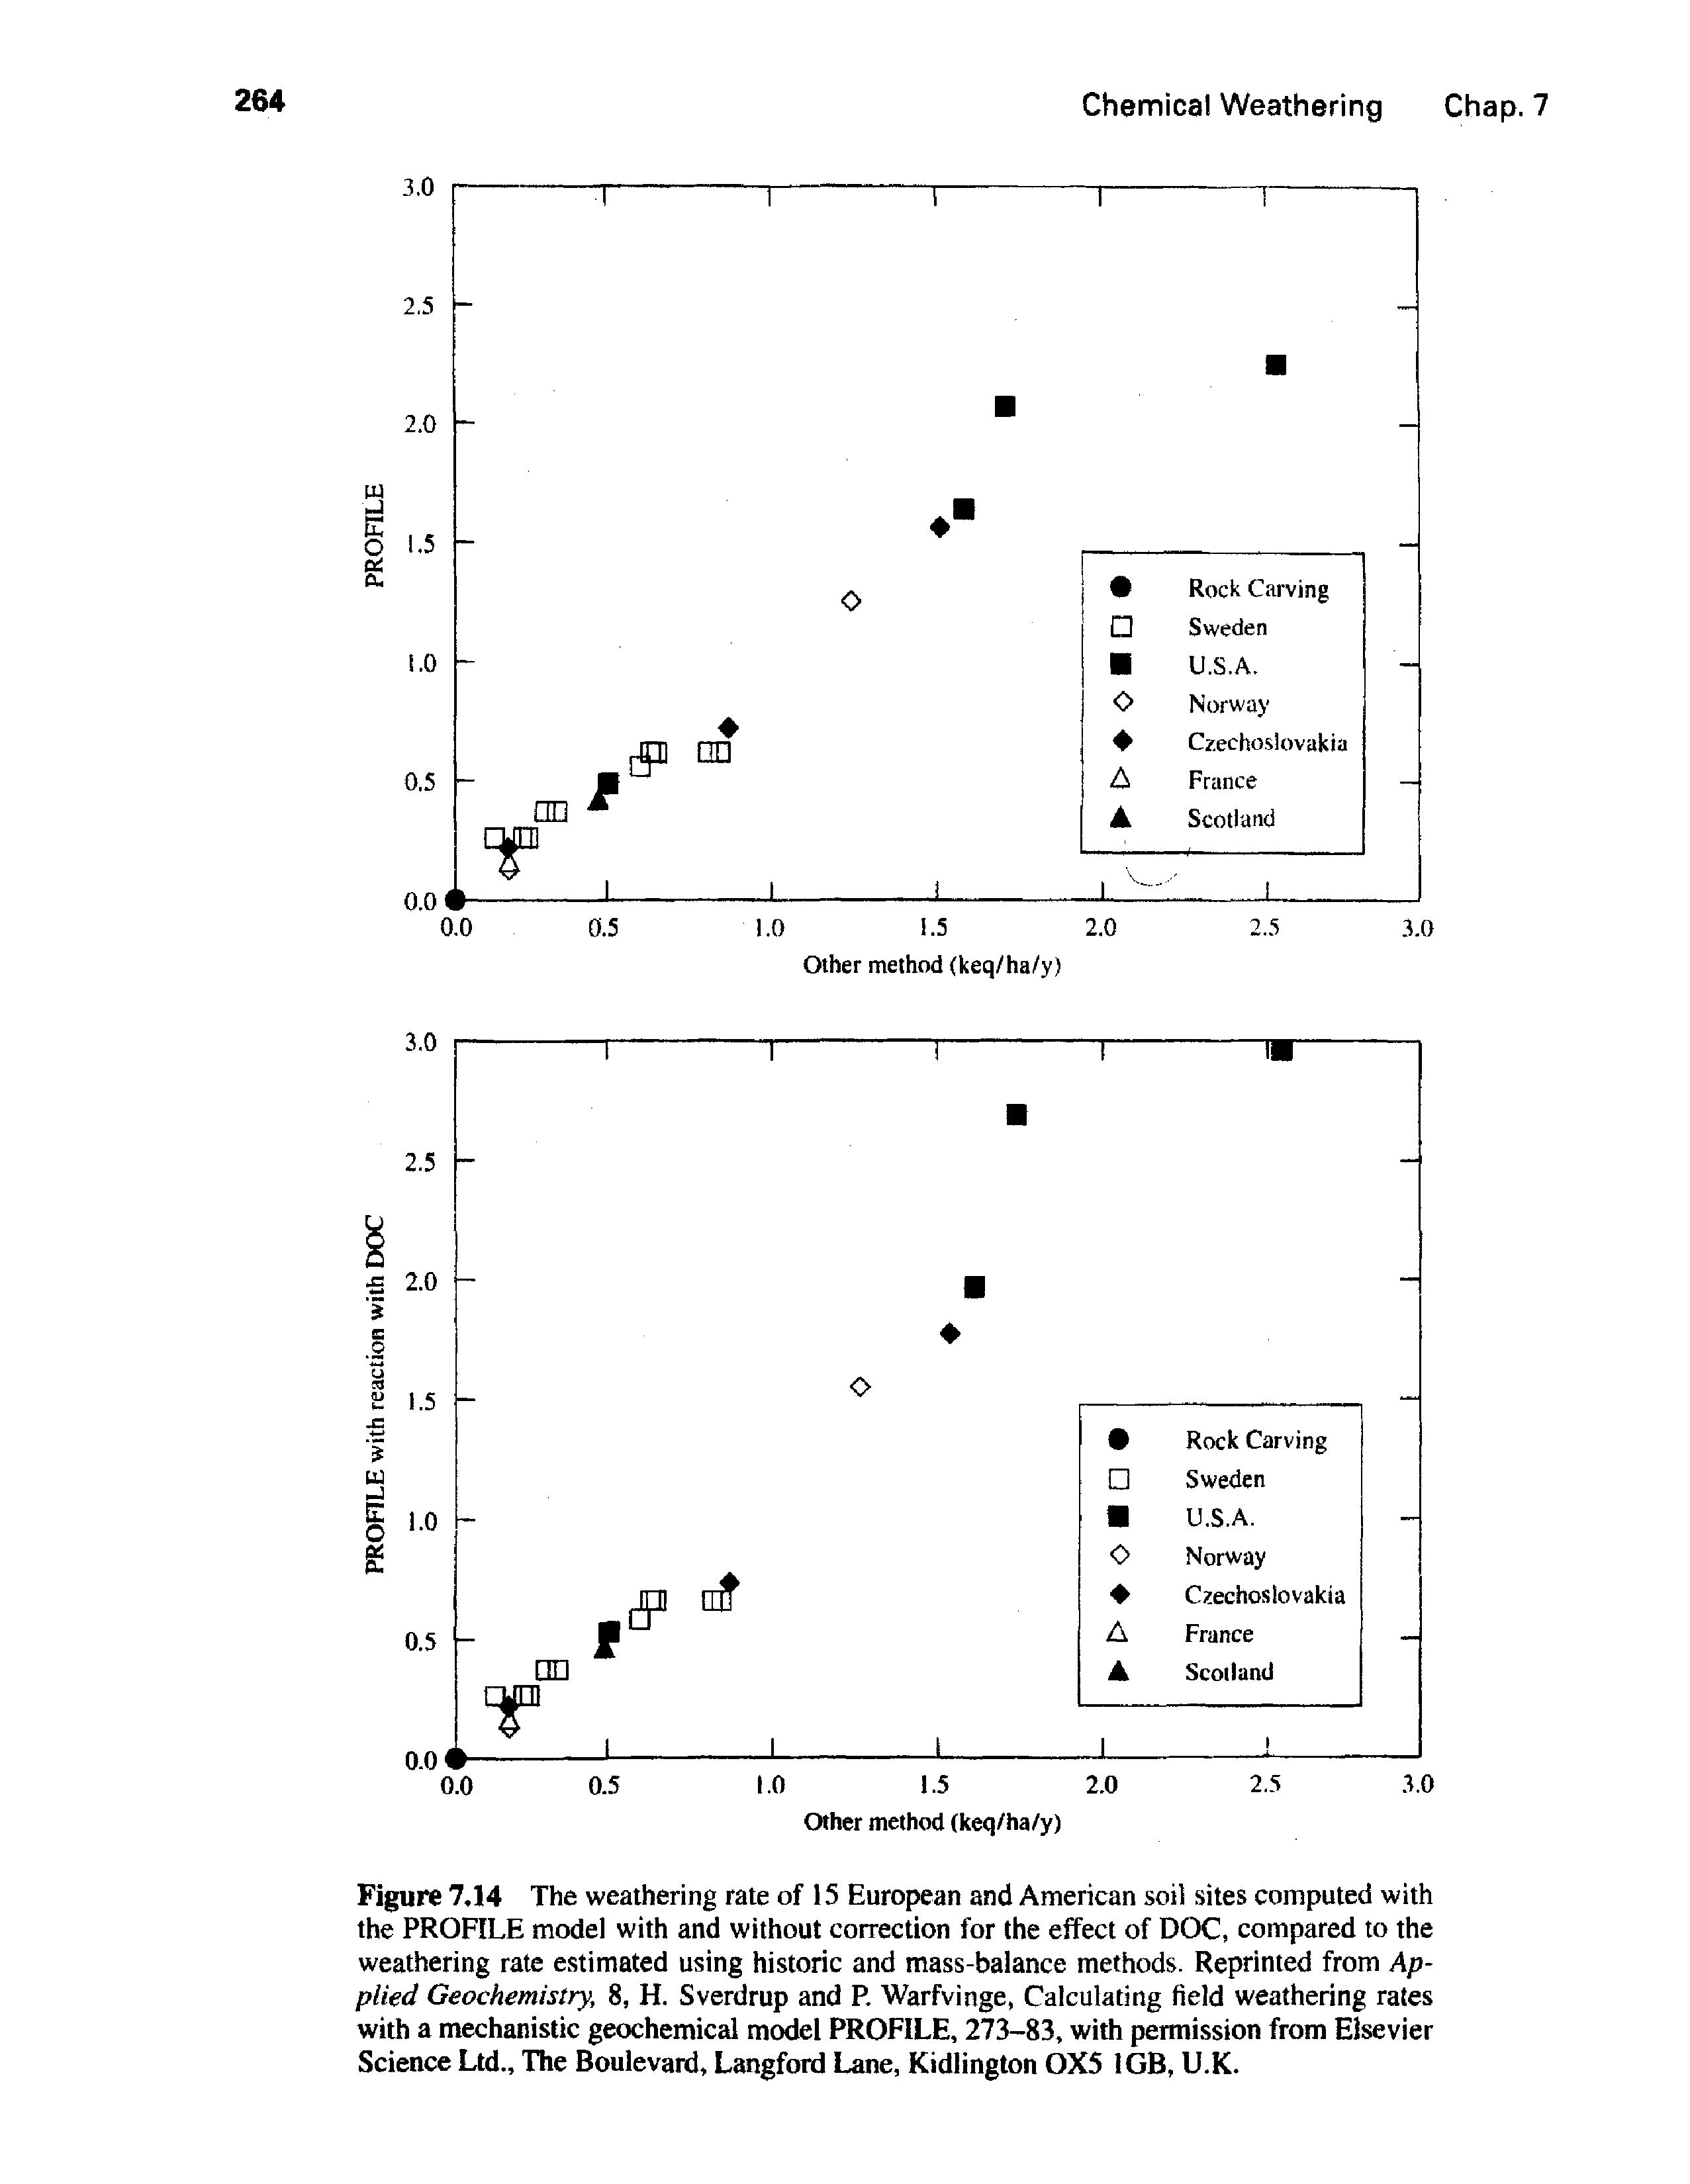 Figure 7,14 The weathering rate of 15 European and American soil sites computed with the PROFILE model with and without correction for the effect of DOC, compared to the weathering rate estimated using historic and mass-balance methods. Reprinted from Applied Geochemistry, 8, H. Sverdrup and P. Warfvinge, Calculating field weathering rates with a mechanistic geochemical model PROFILE, 273-83, with permission from Elsevier Science Ltd., The Boulevard, Langford Lane, Kidlington 0X5 1GB, U.K.